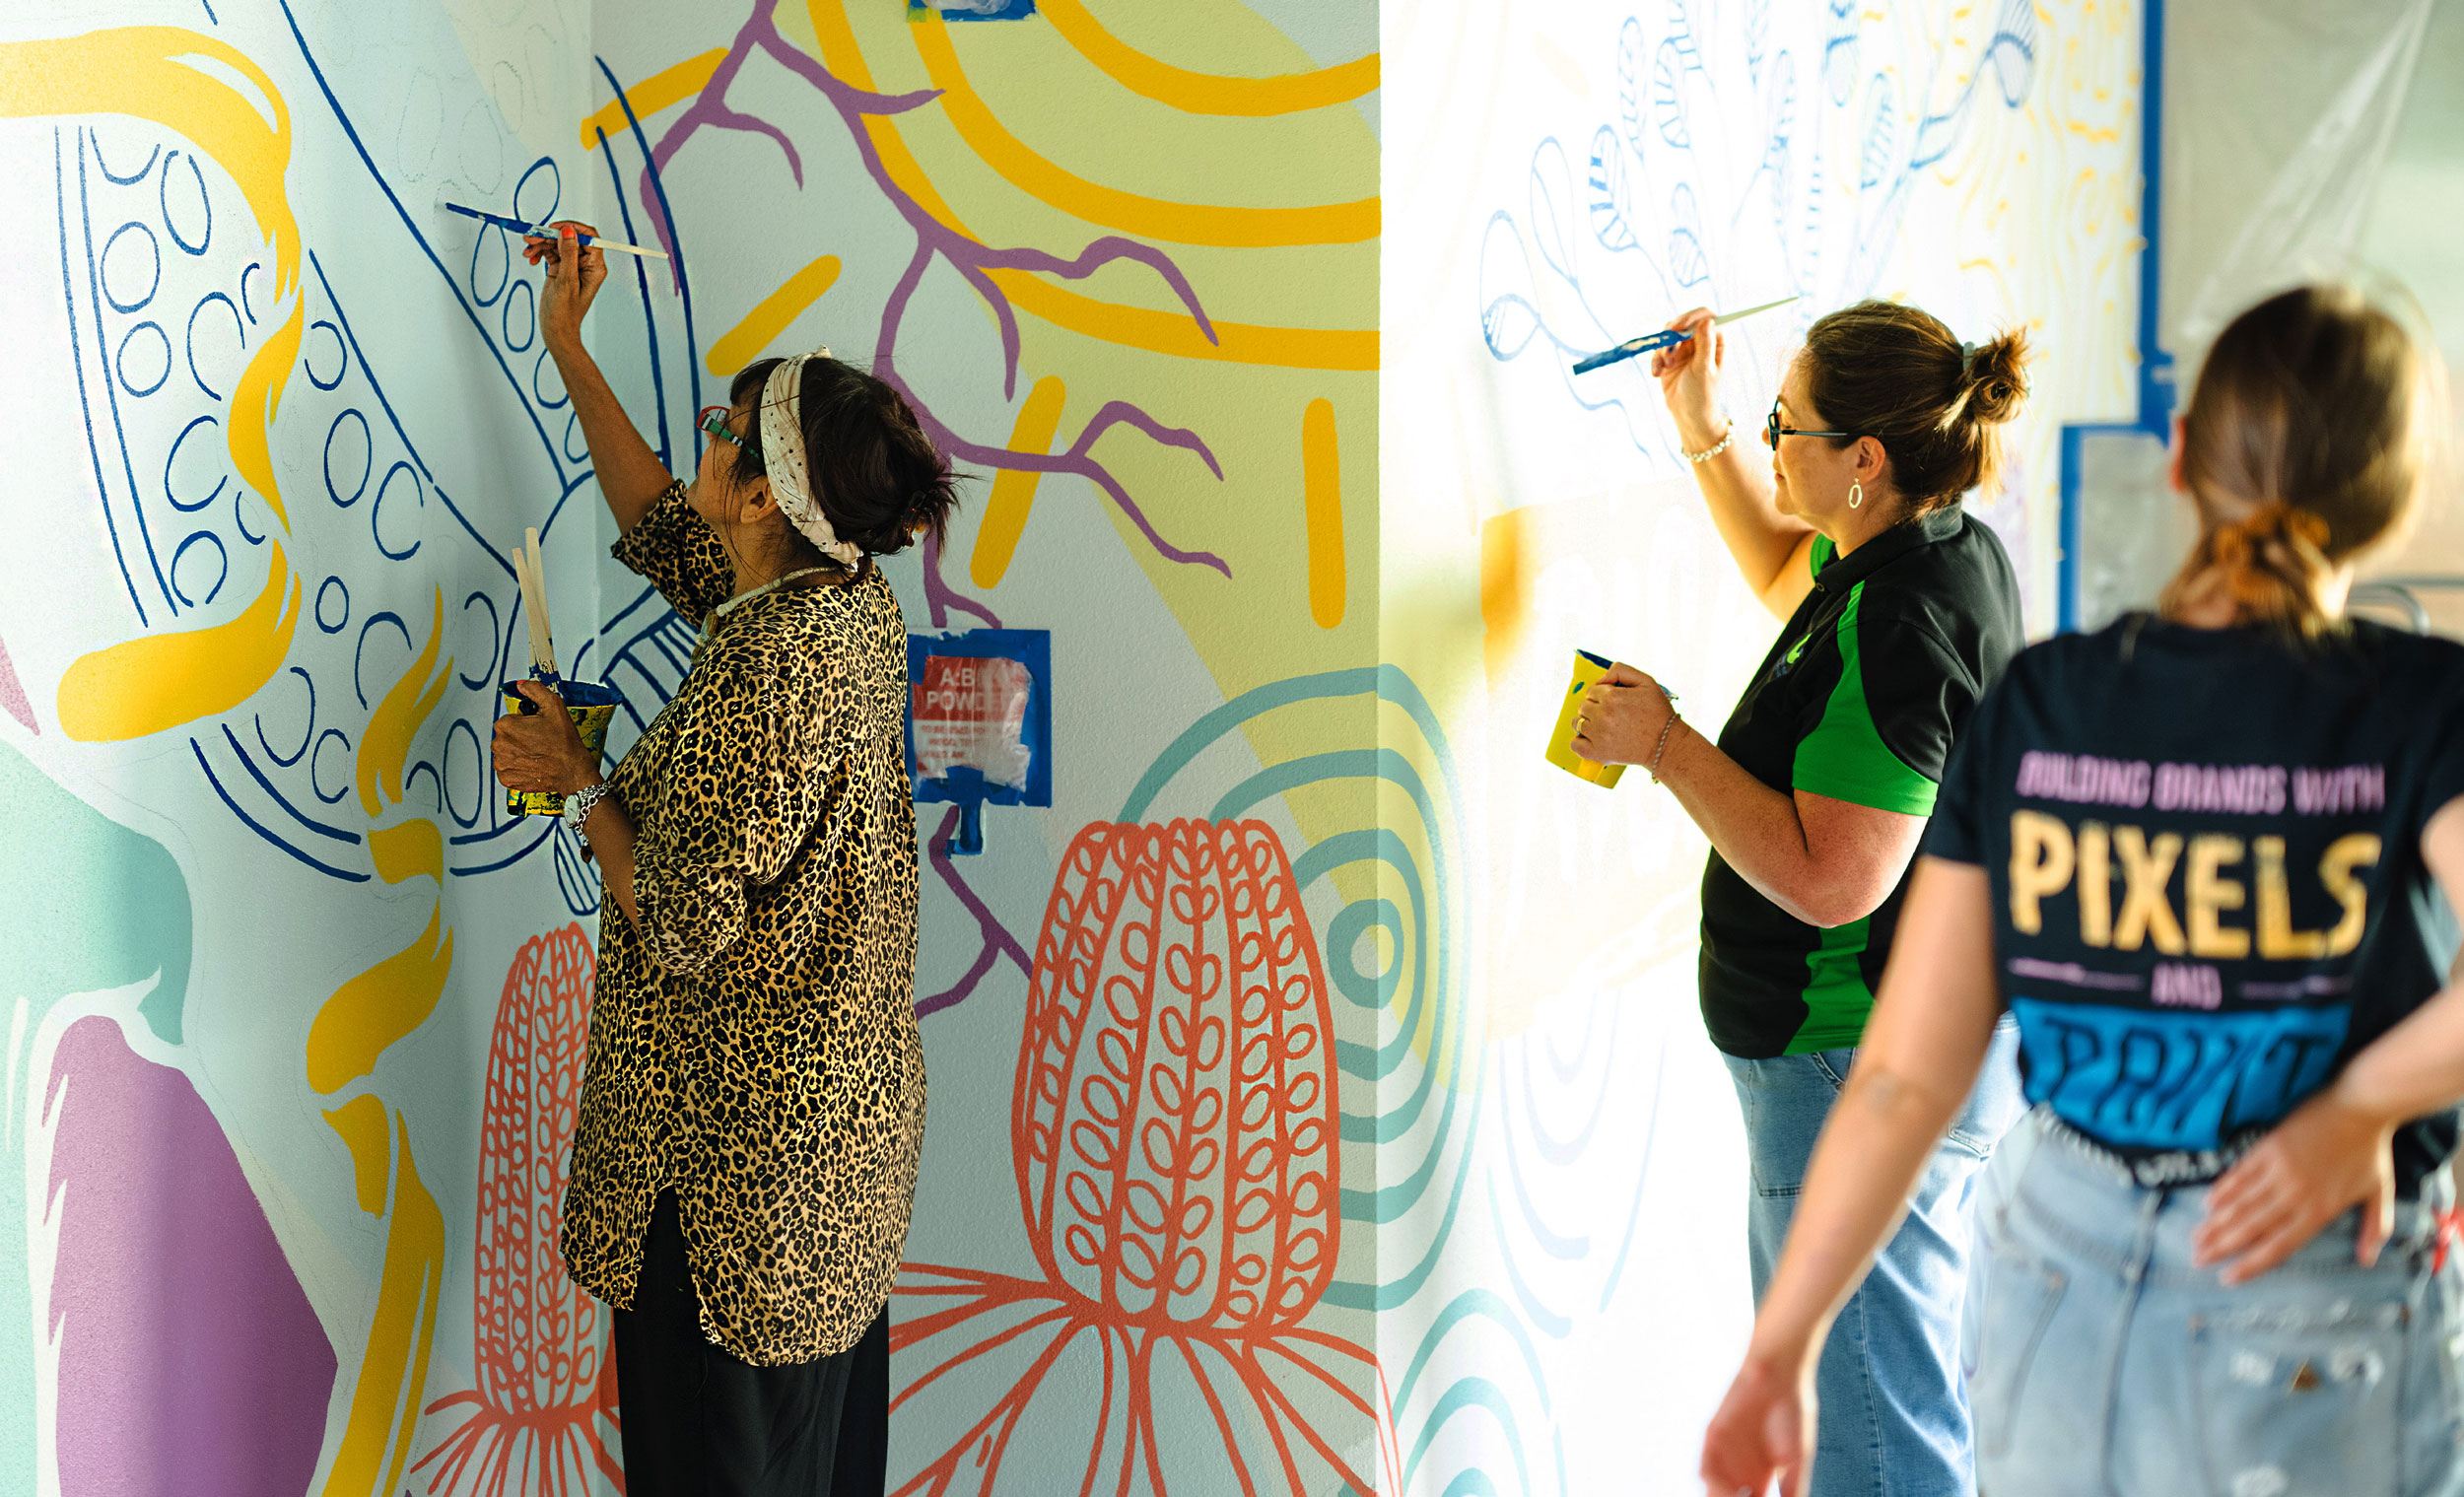 Artist Lisa Sorbie paints the mural alongside youth worker Connie